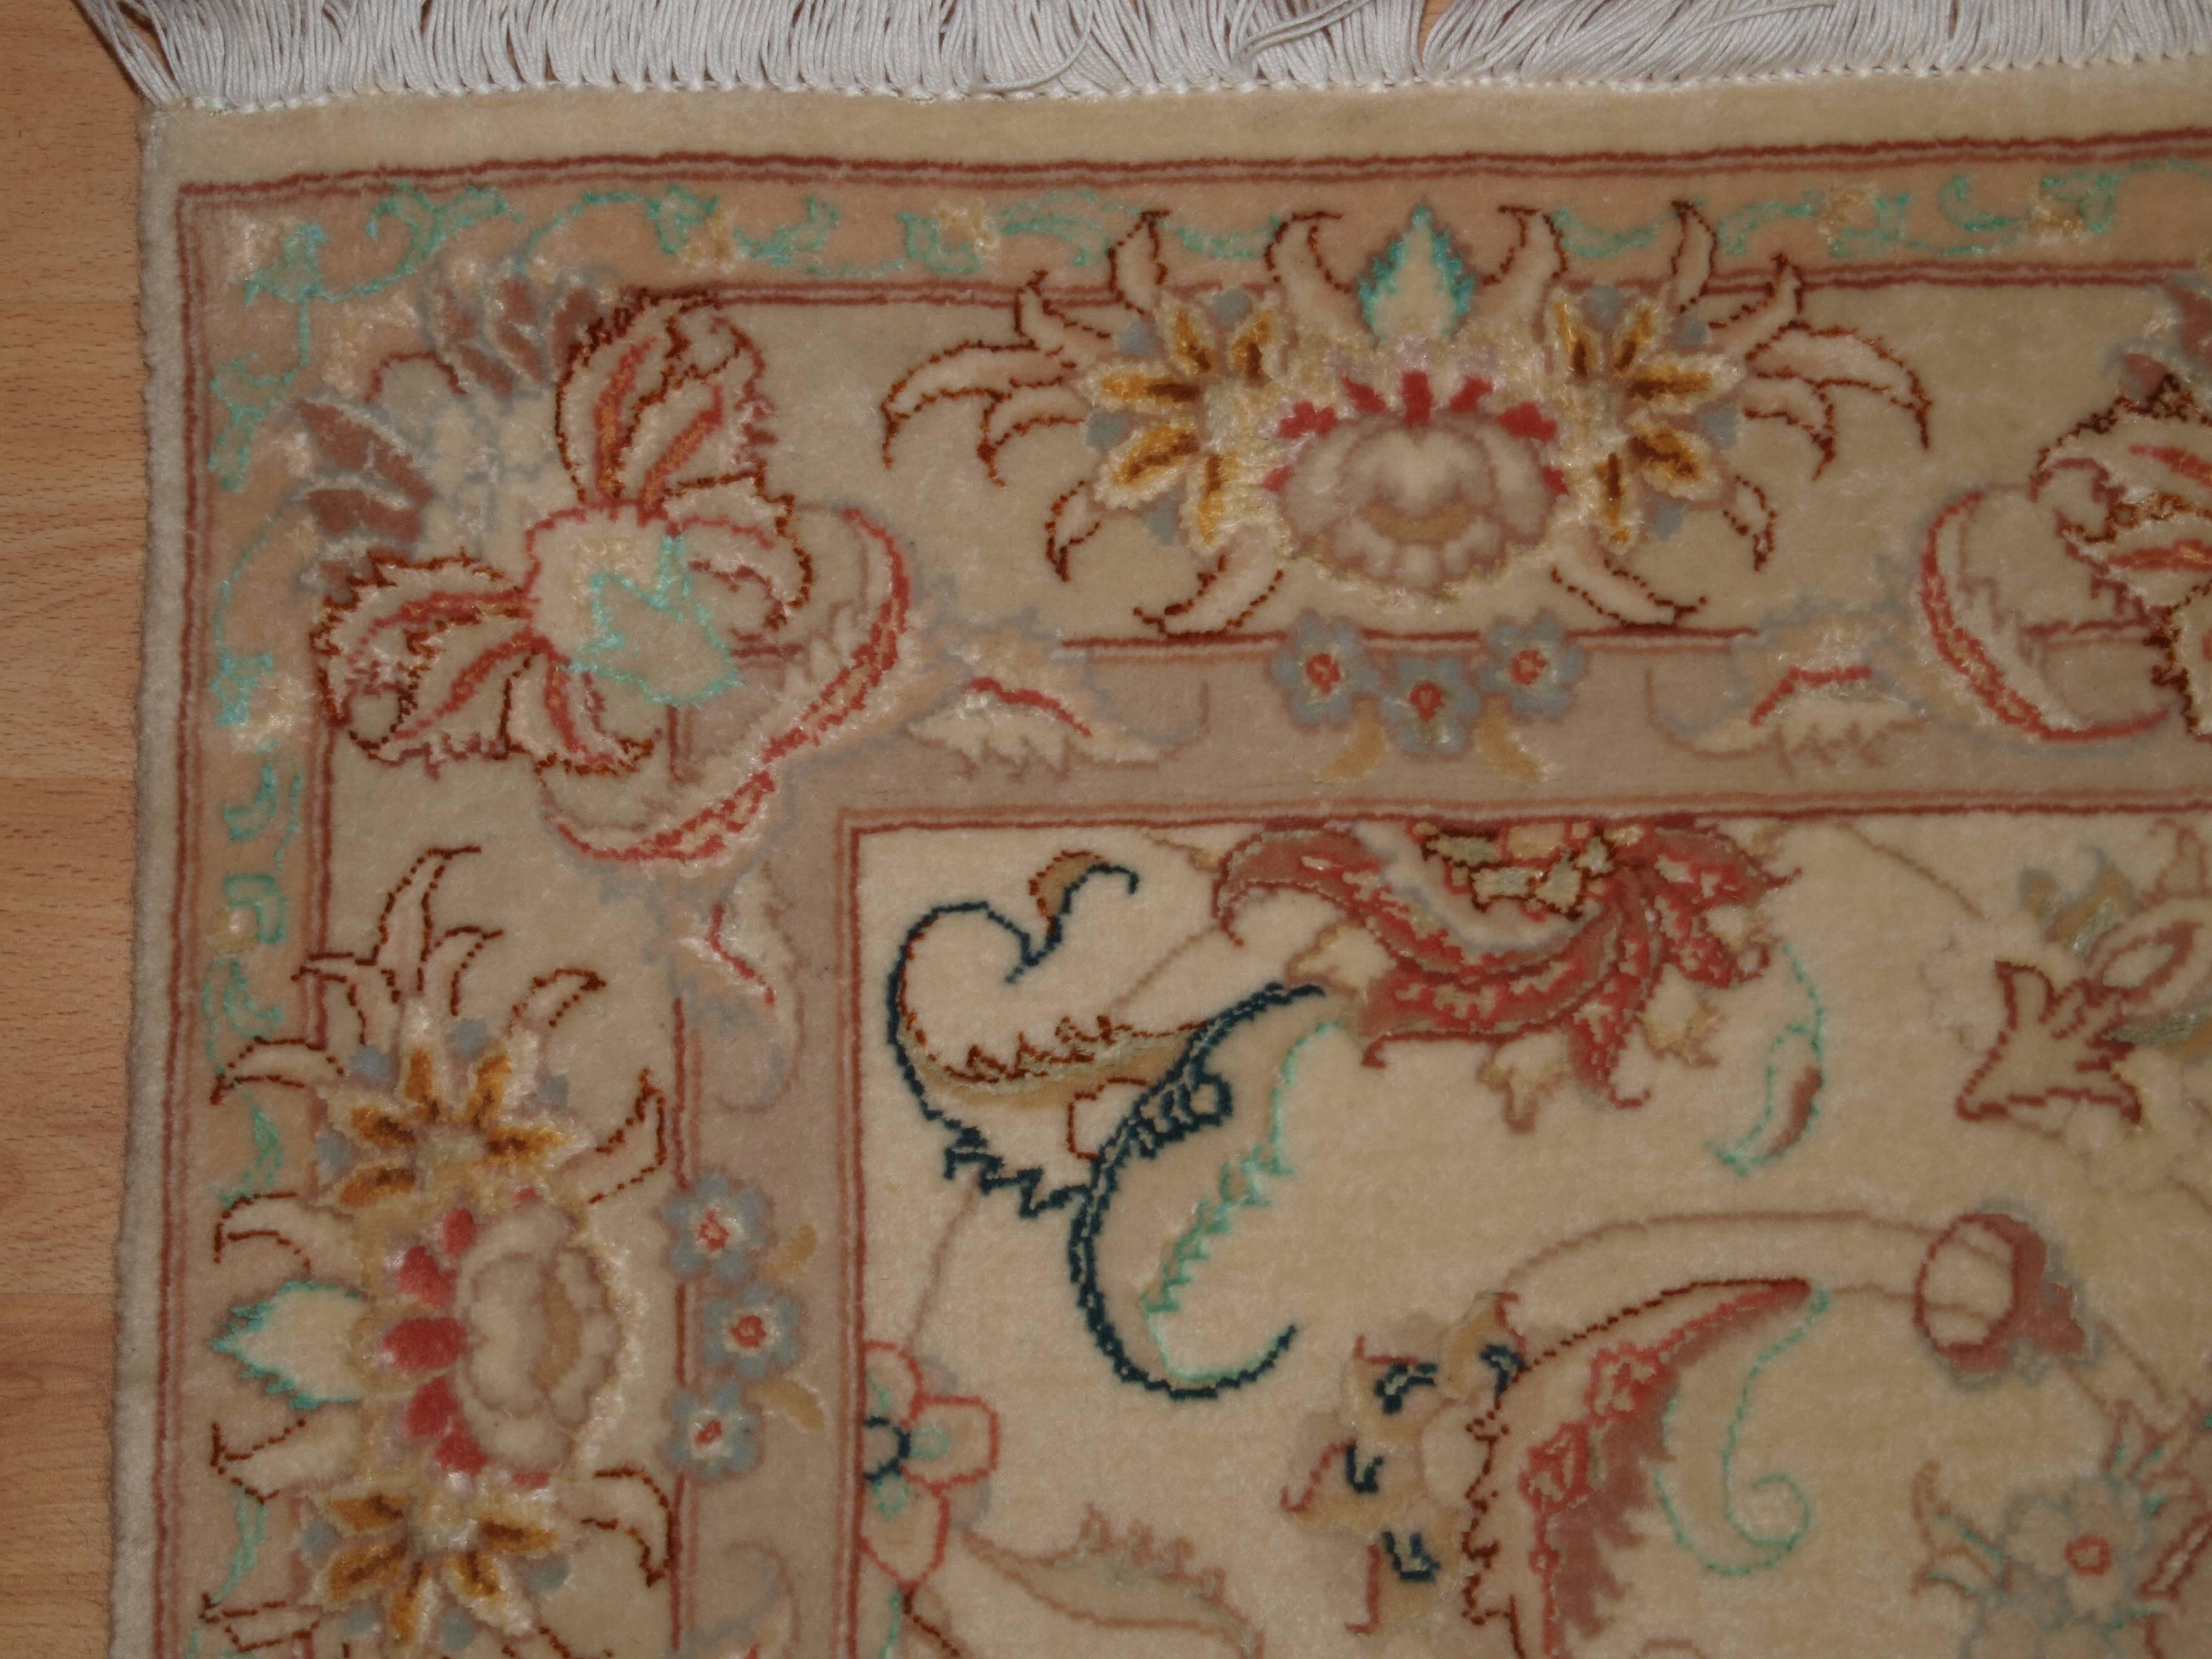 Persian Tabriz runner, fine wool and silk, soft pastel colors, perfect condition.
Size: 10ft 2in x 2ft 9in (310 x 84cm).

Very fine hand-knotted Persian Tabriz runner in lambs wool and silk.

The runner is about 5-10 years old but